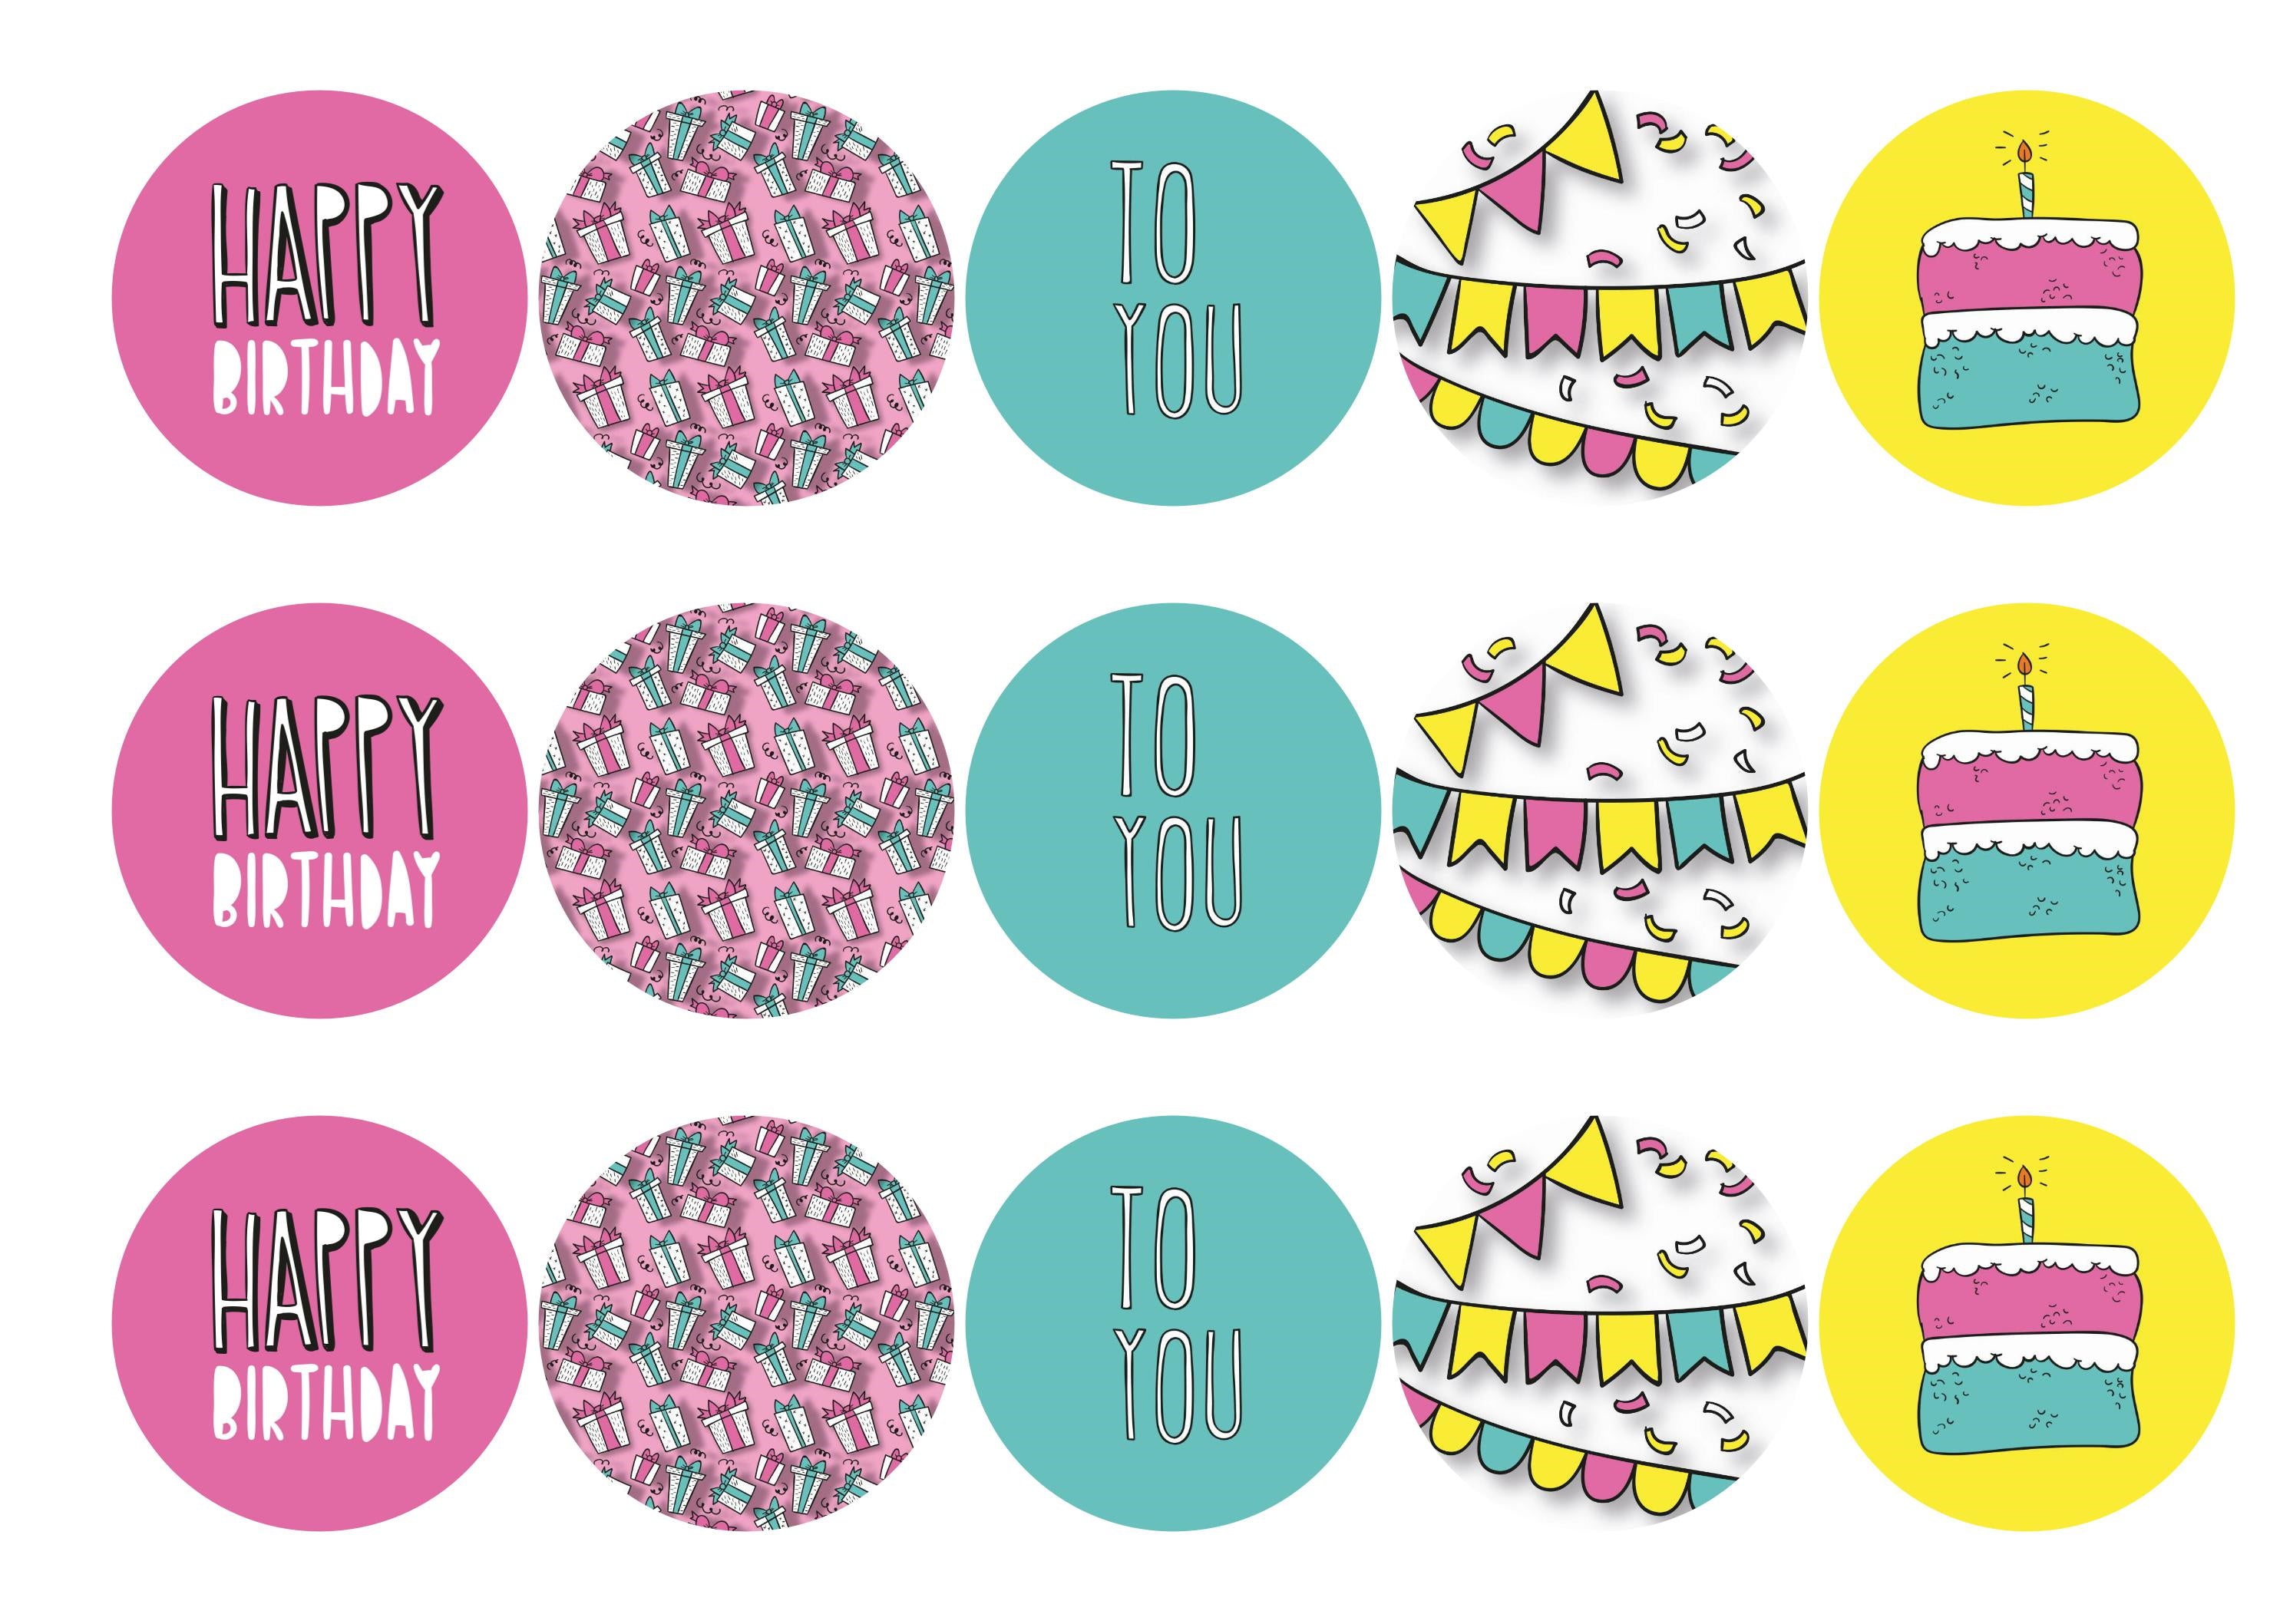 Printed cupcake toppers with mixed birthday designs in pink blue and yellow